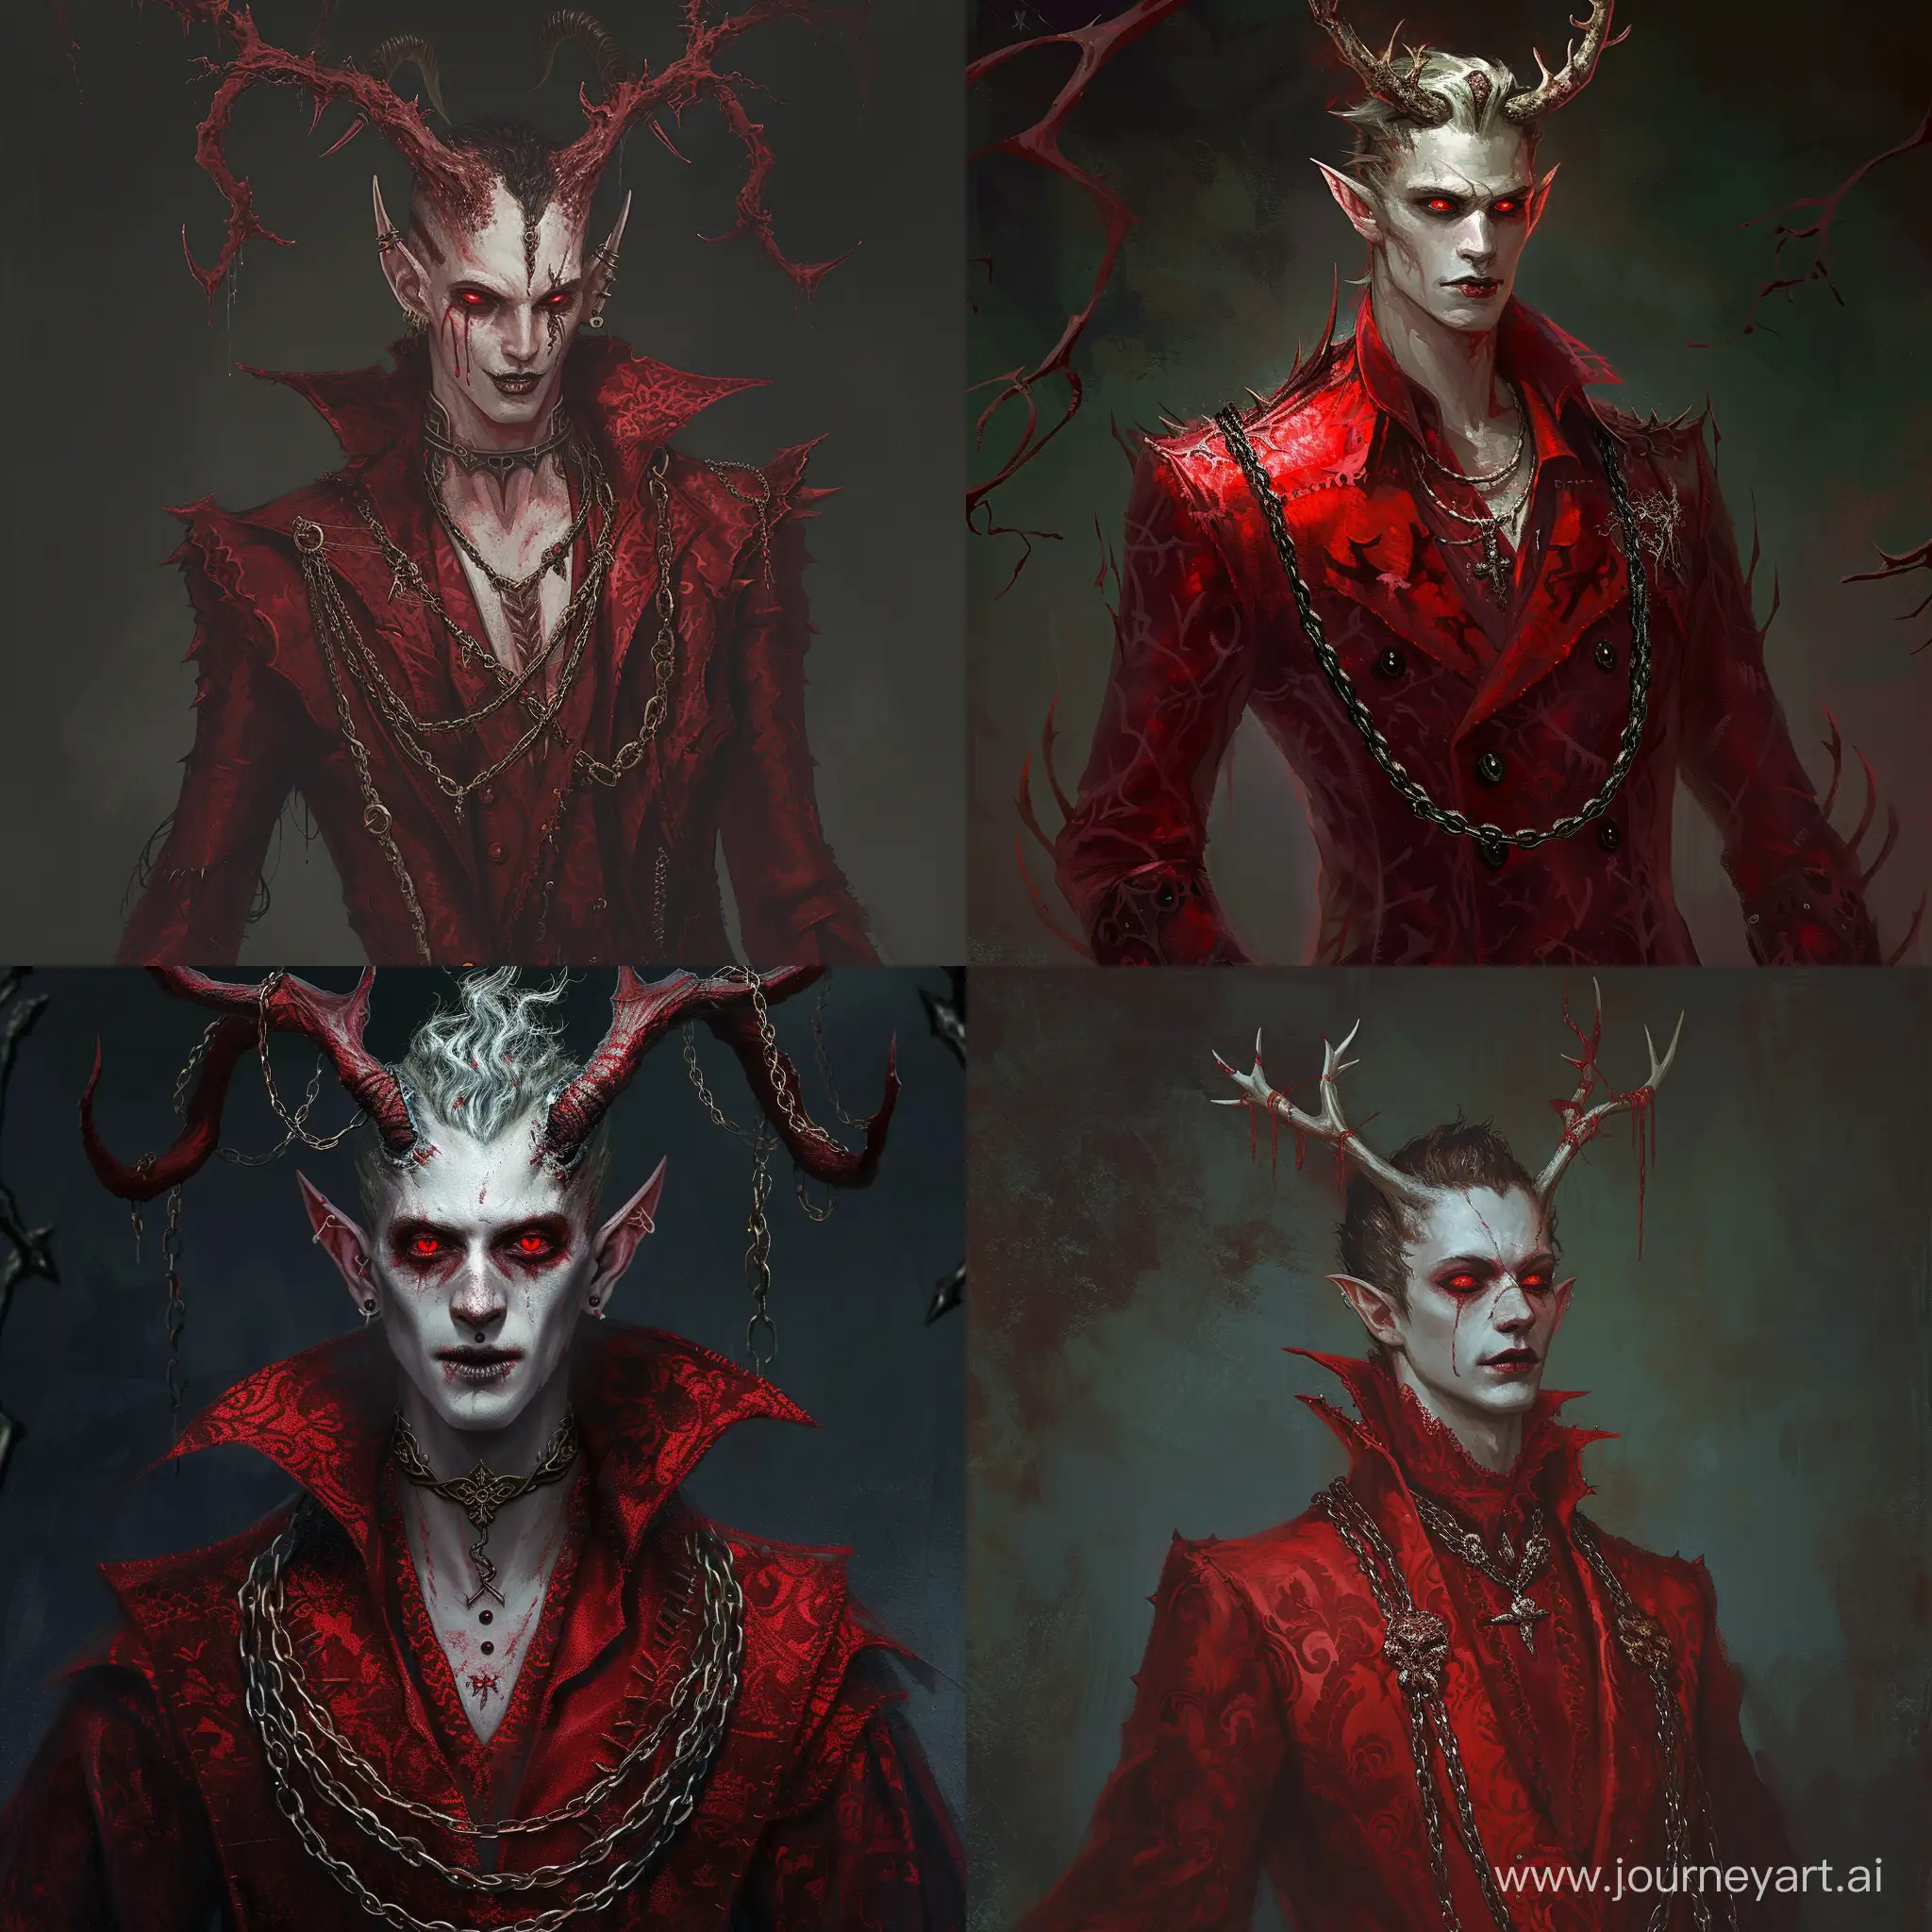 Malevolent-Overlord-in-Stylish-Red-Garb-with-Antlerlike-Horns